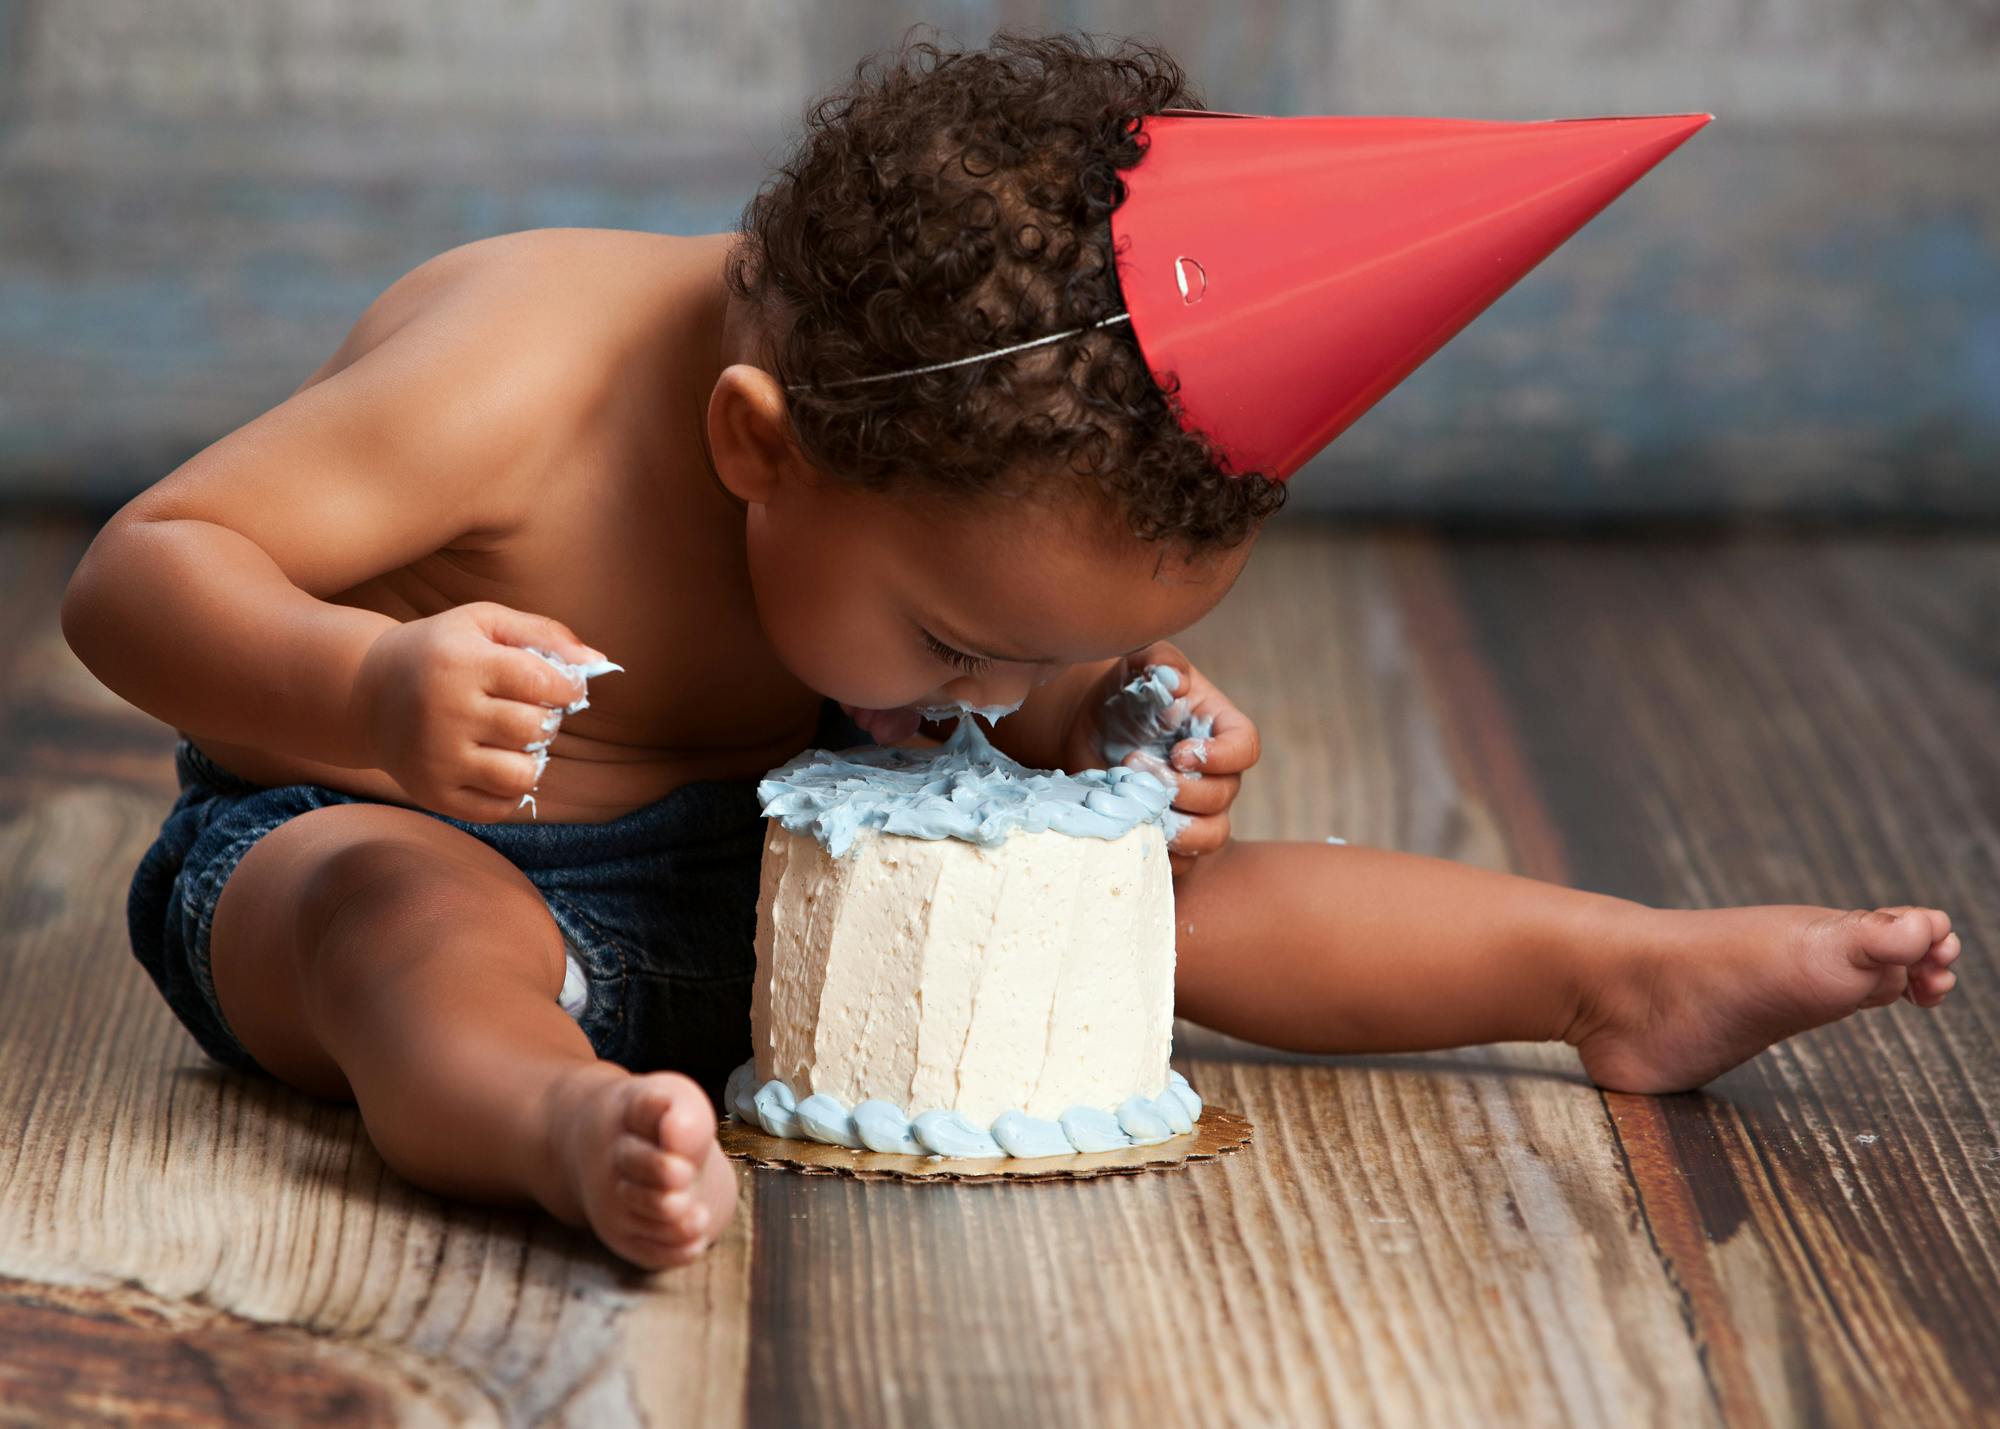 A baby sticking his face into a small birthday cake